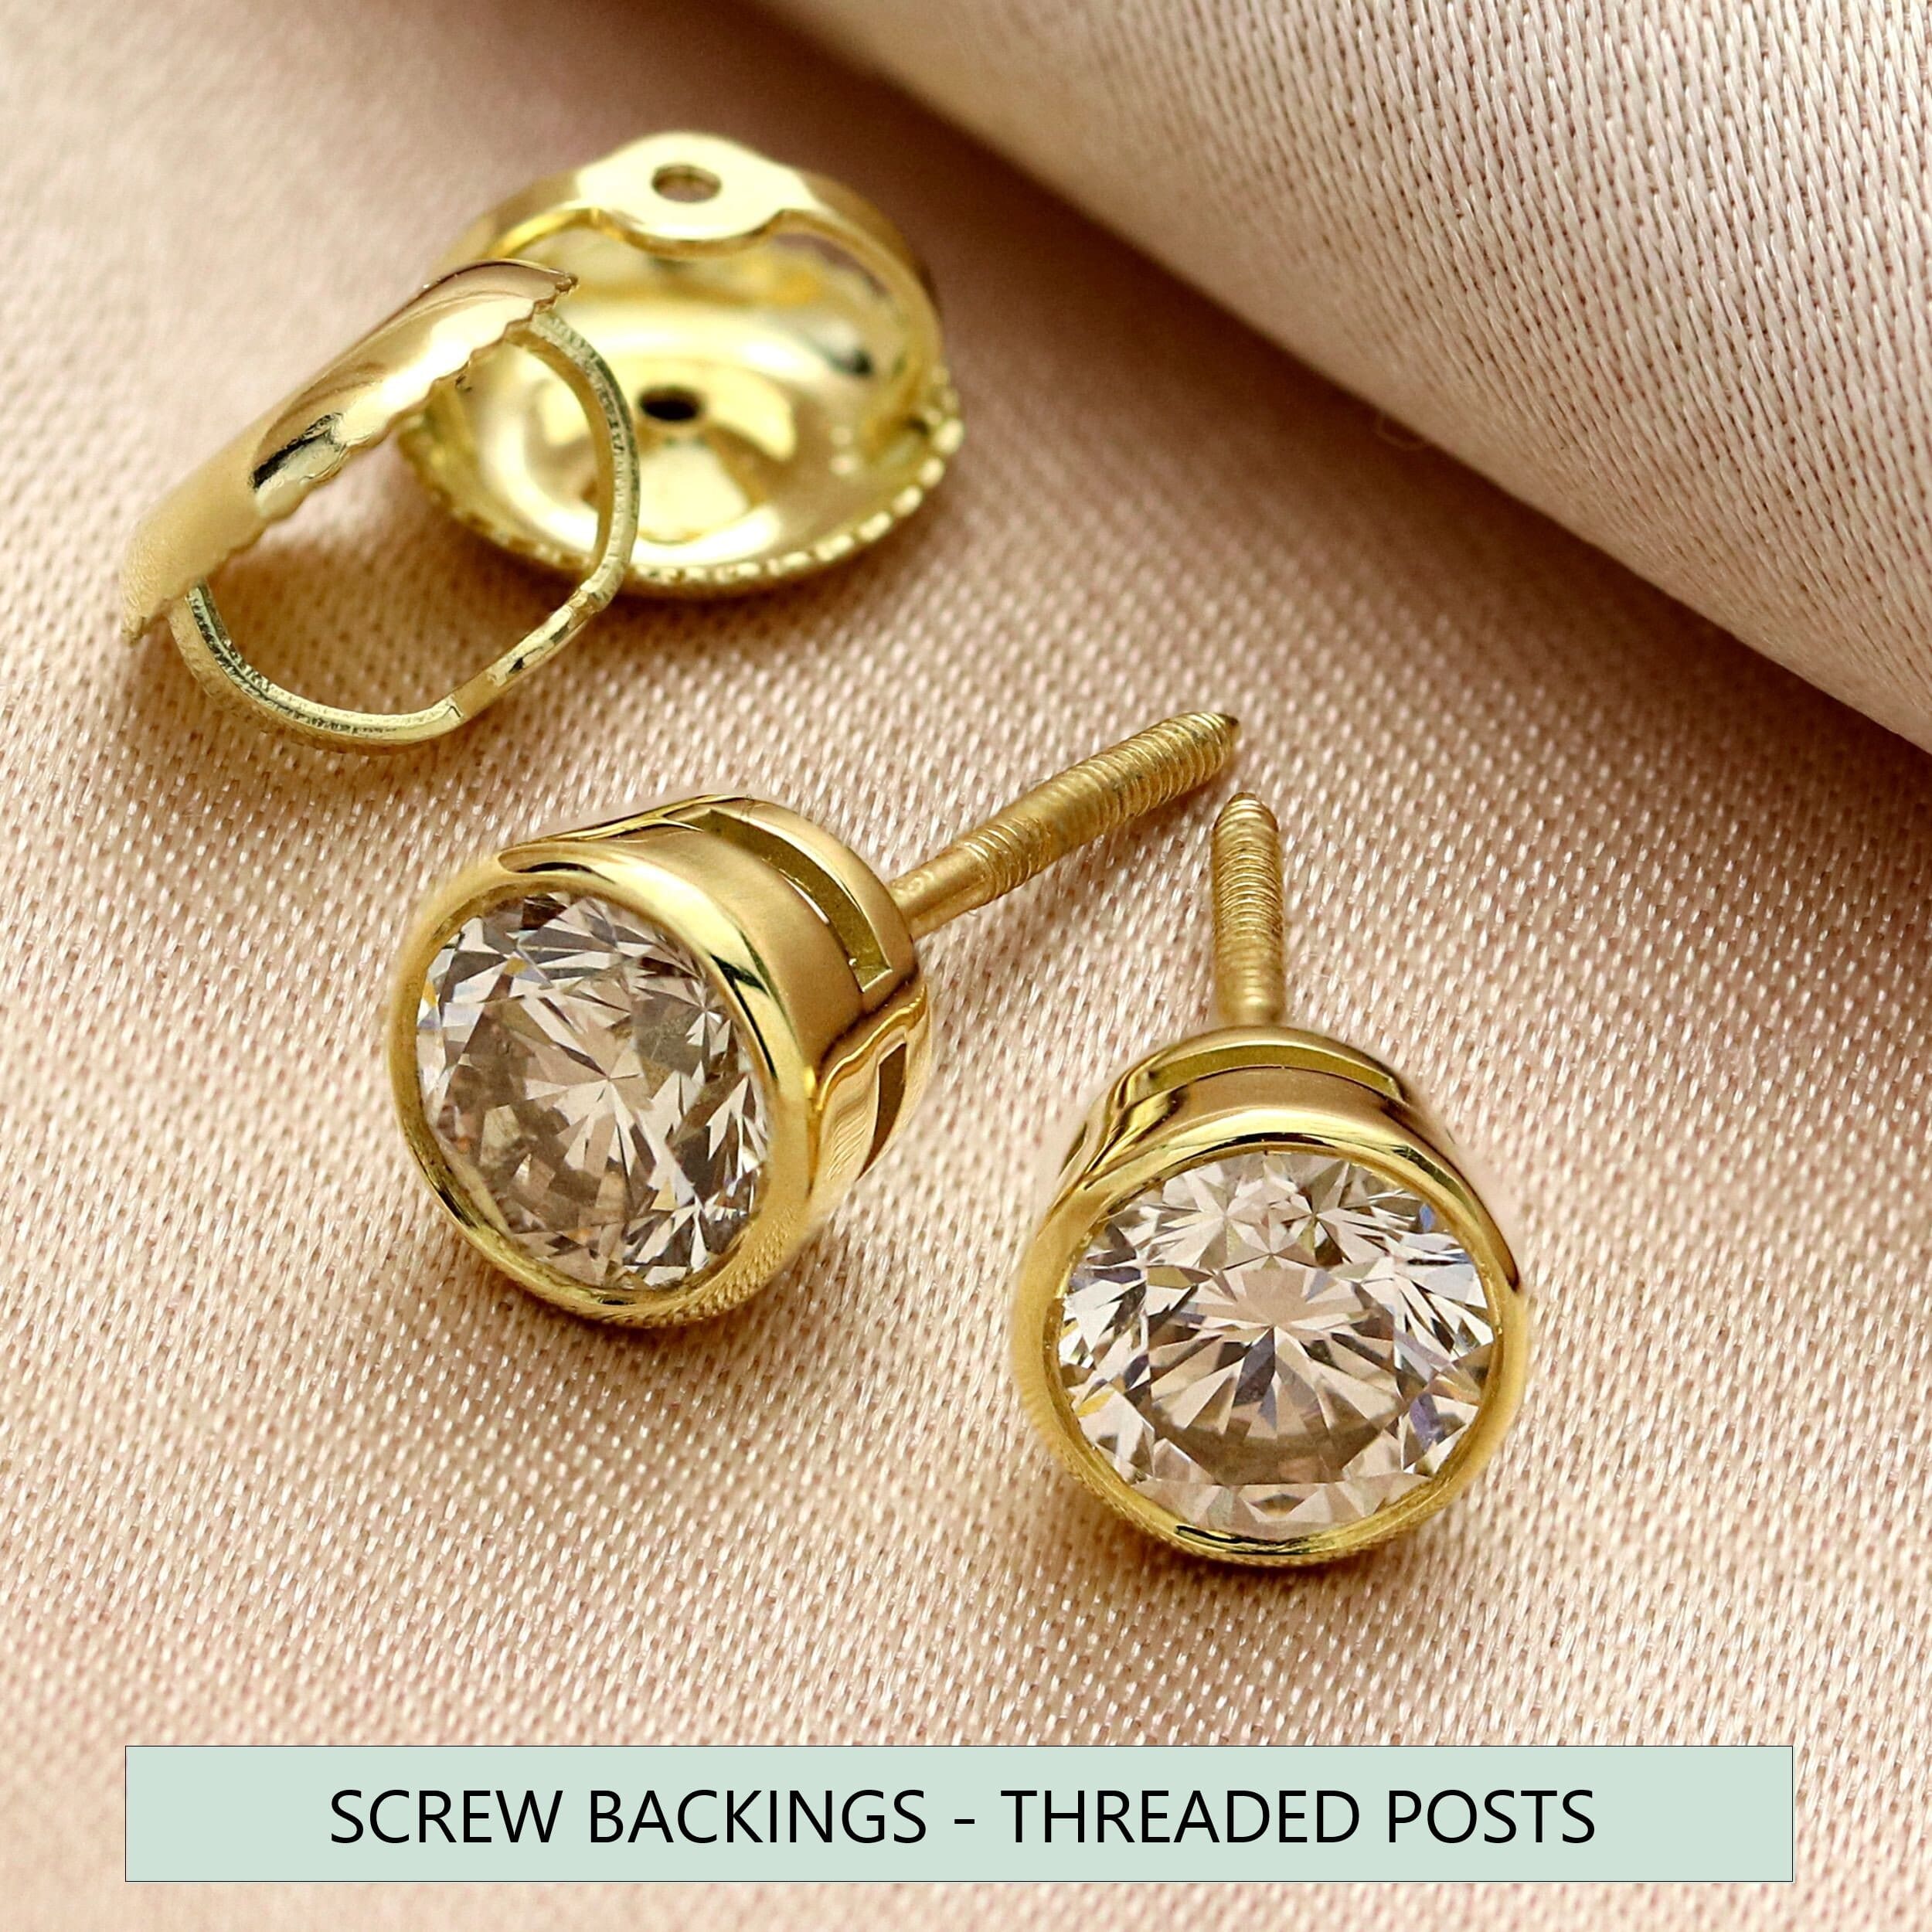 Earring Backings Guide: What are the best earrings backs to buy?